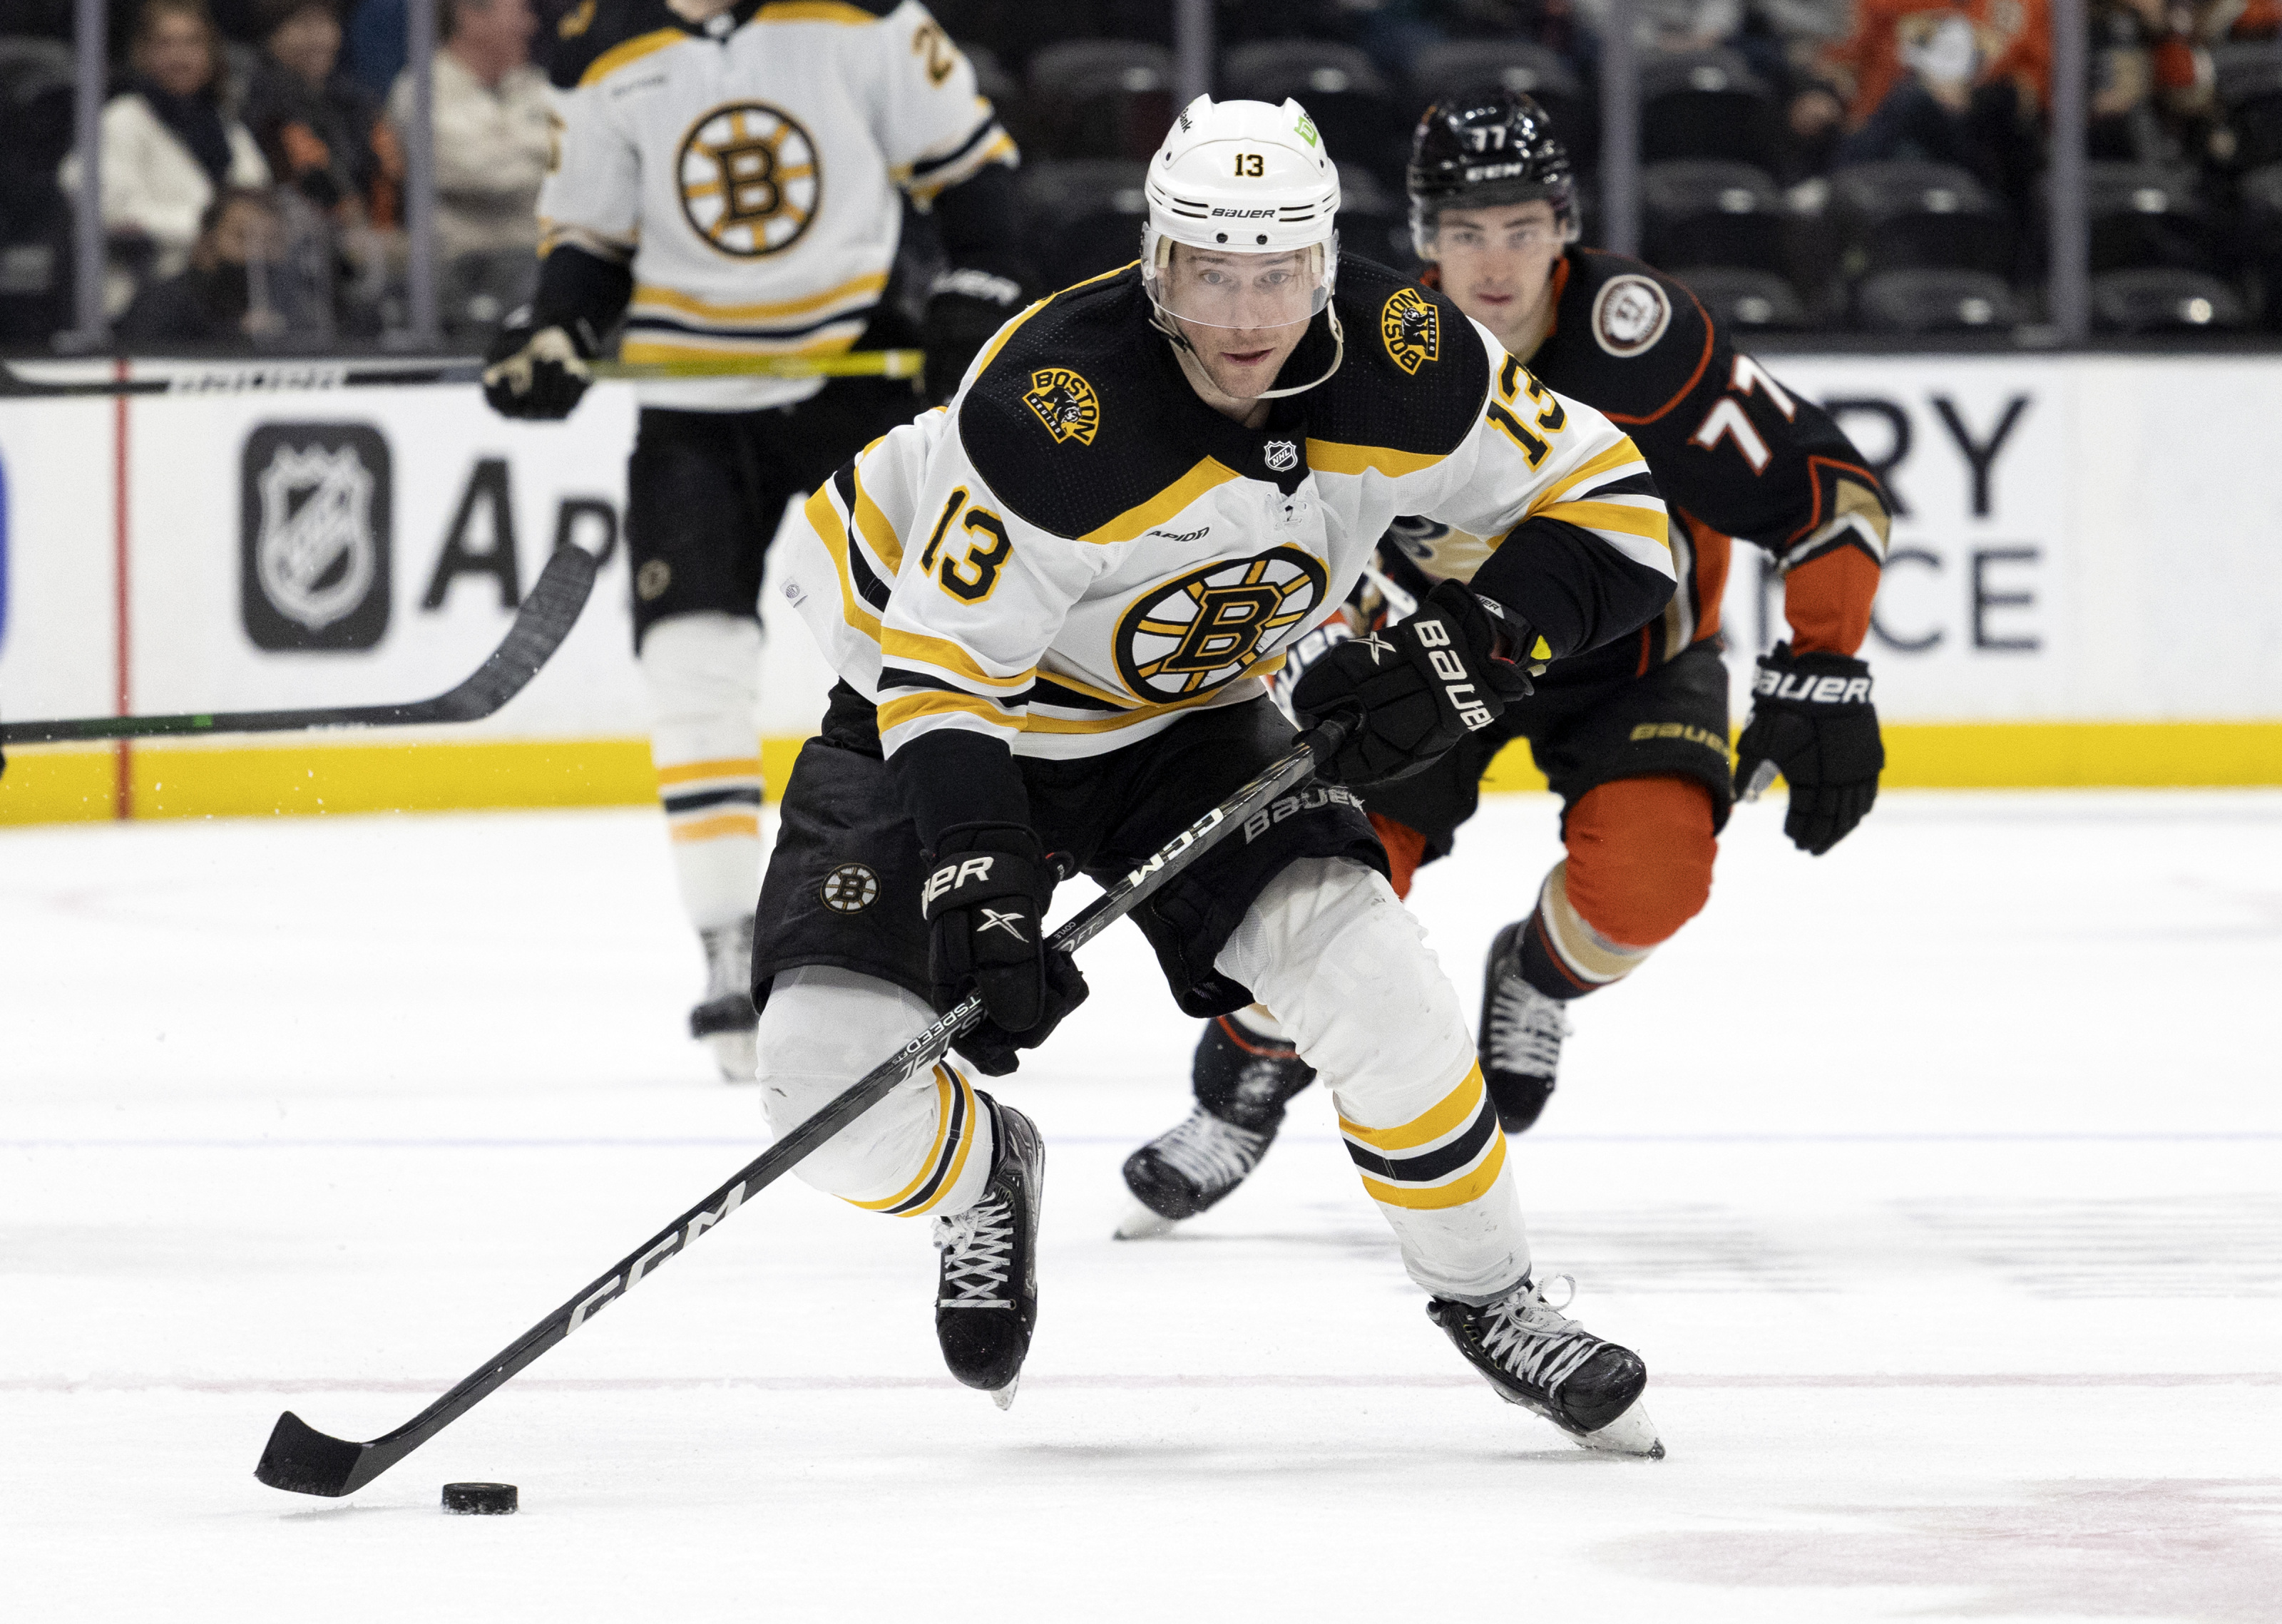 Coyle the Closest Player the Bruins Have to Fill Bergeron's Skates